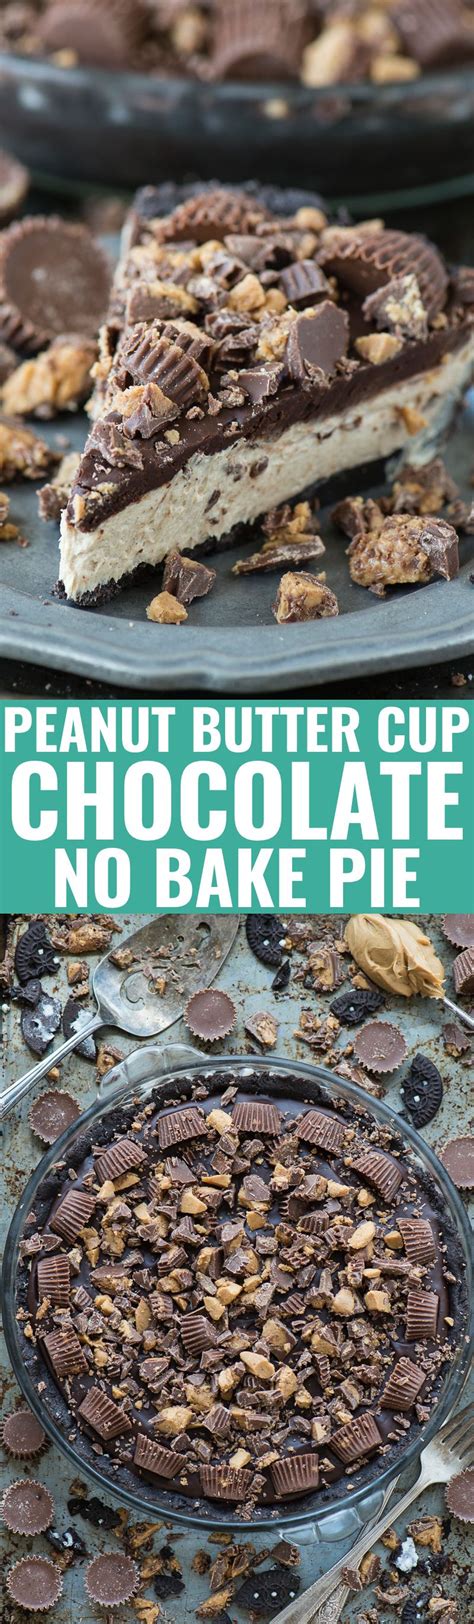 The Best No Bake Peanut Butter Cup Chocolate Pie Oreo